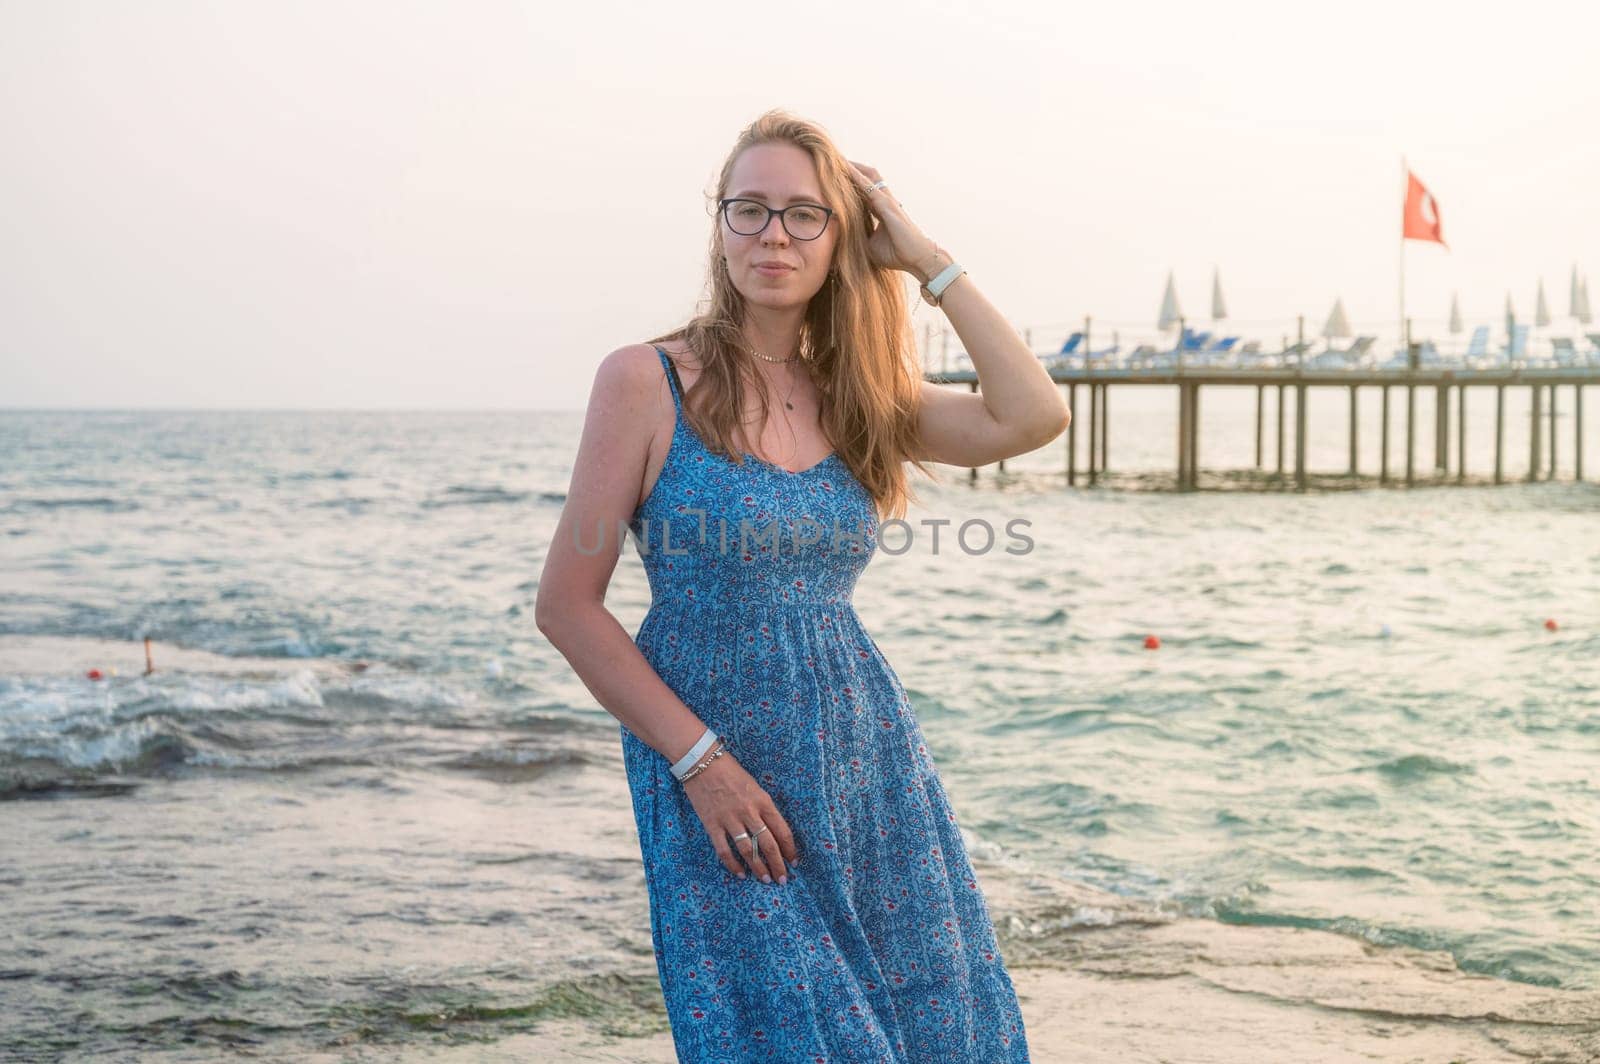 Woman sits on the beach and looks at the sea in Alanya city, Turkey. Travelling or vacation concept